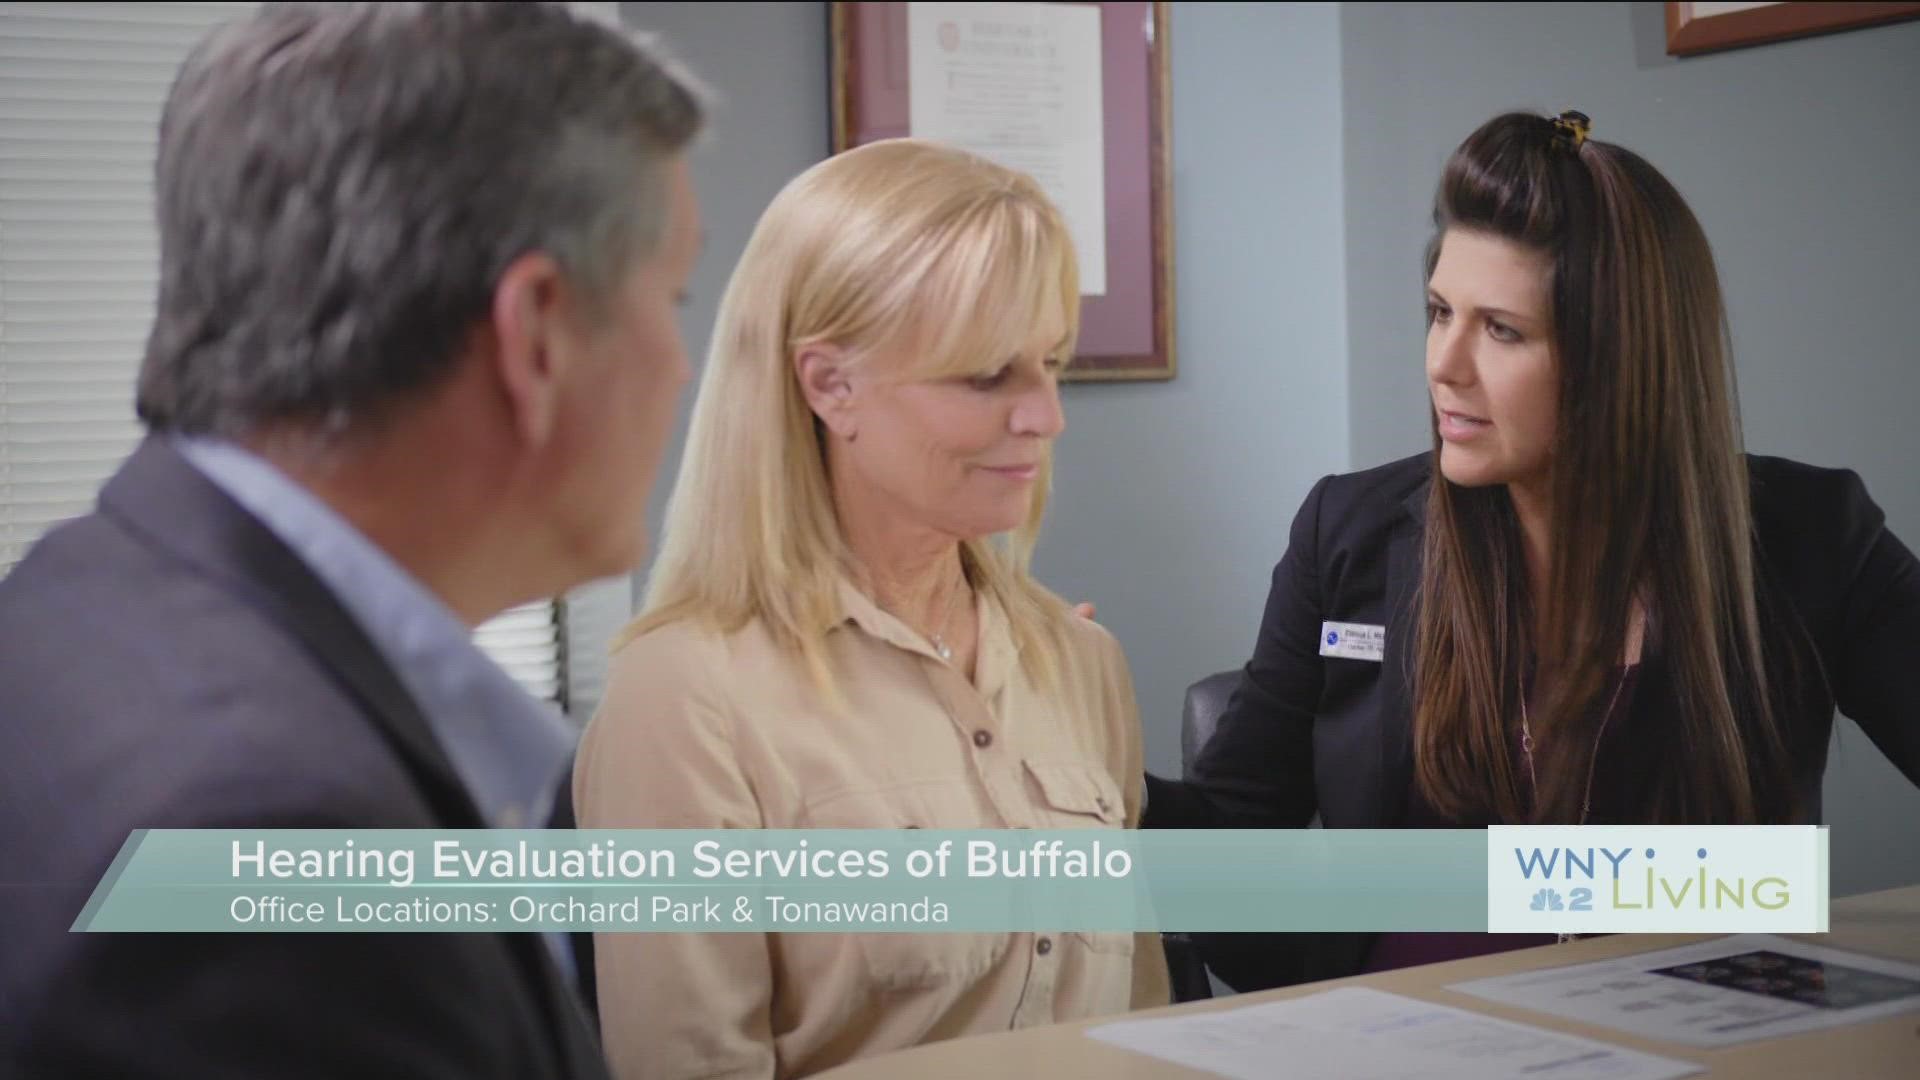 WNY Living - January 7 - Hearing Evaluation Services of Buffalo (THIS VIDEO IS SPONSORED BY HEARING EVALUATION SERVICES OF BUFFALO)